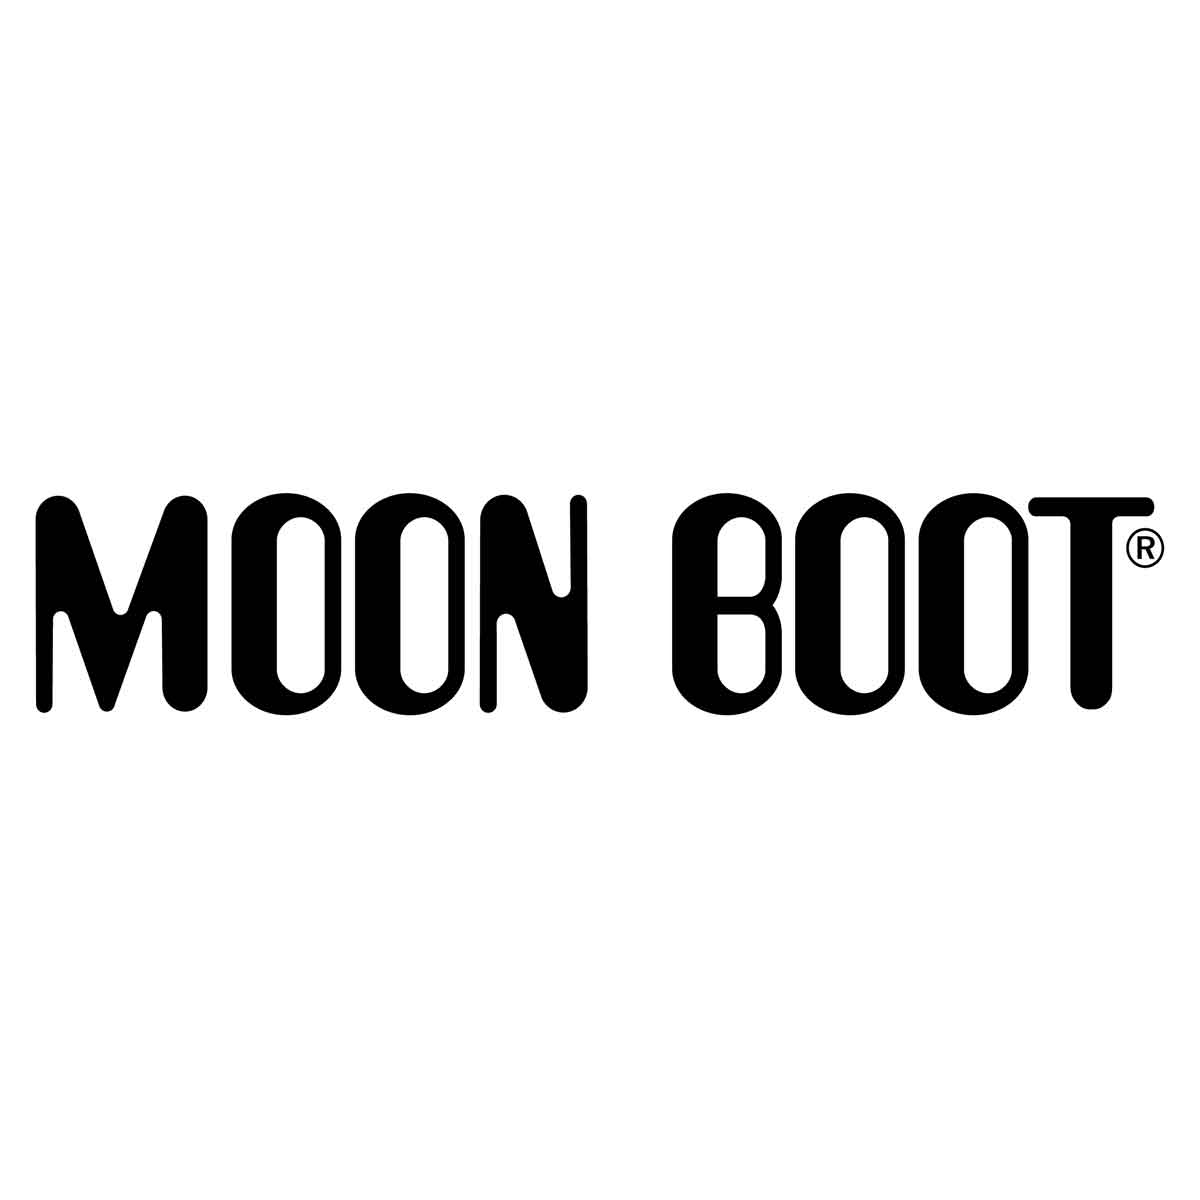 Flash Sale Sign Up - moon boot